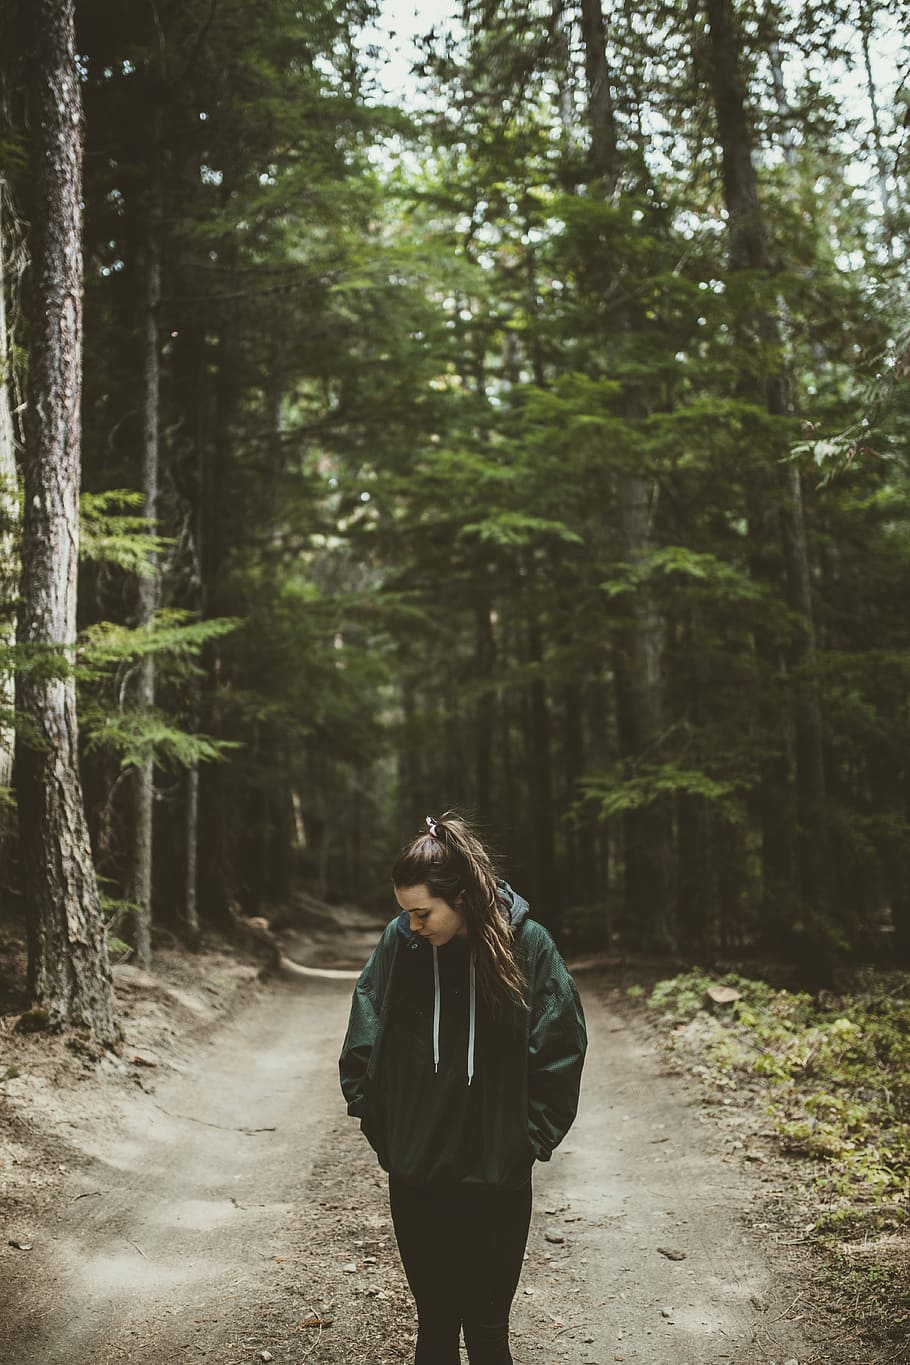 girl, road, trail, dirt road, hiking, nature, forest, trees, hoodie, people